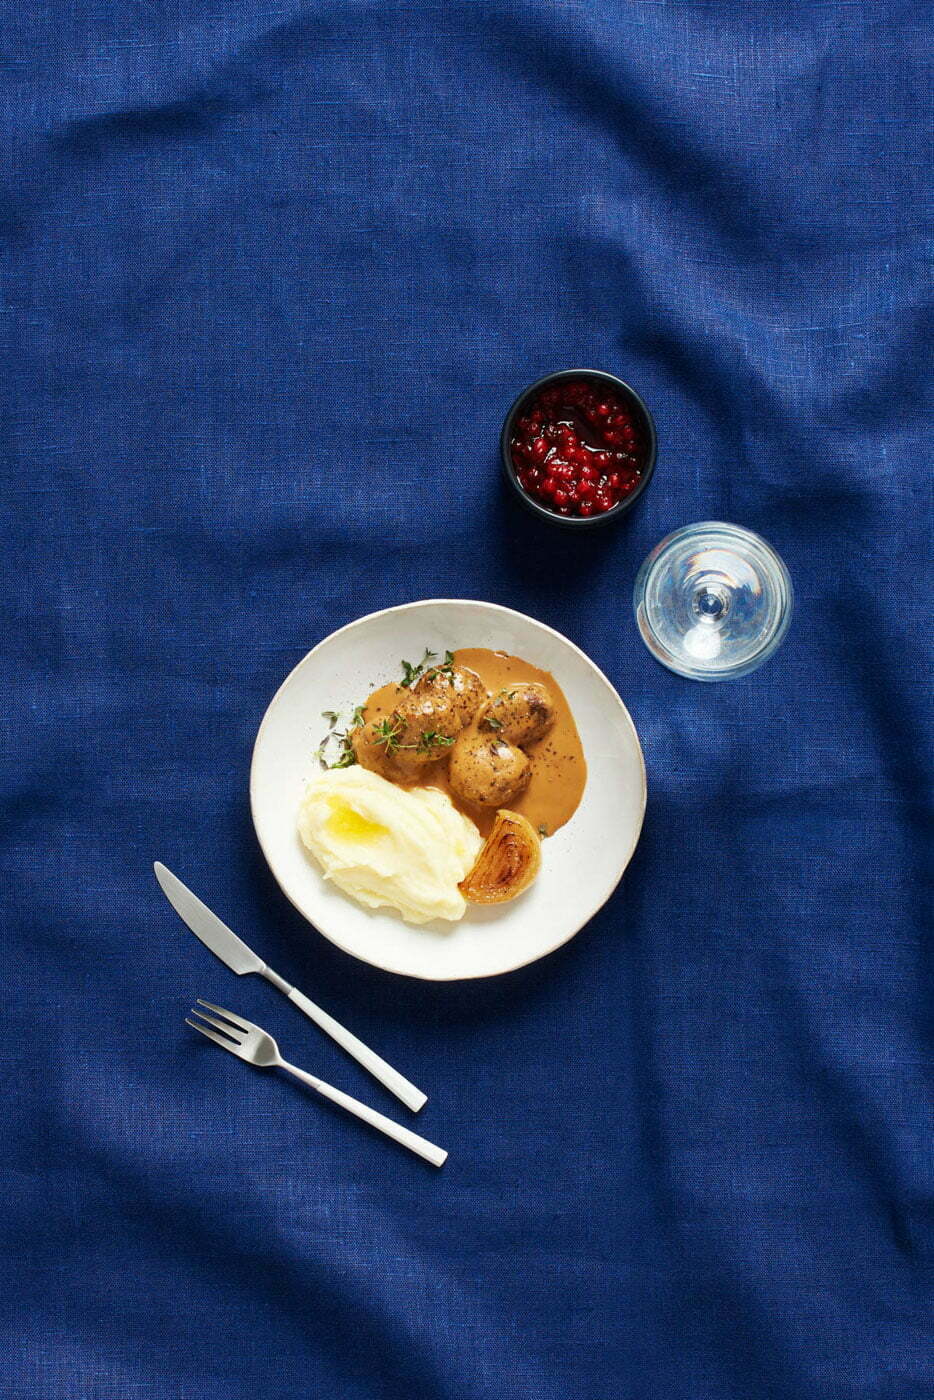 Mashed_potatoes_with_meatballs_and_lingonberries_on_a_blue_tablecloth_by_Elina_Himanen